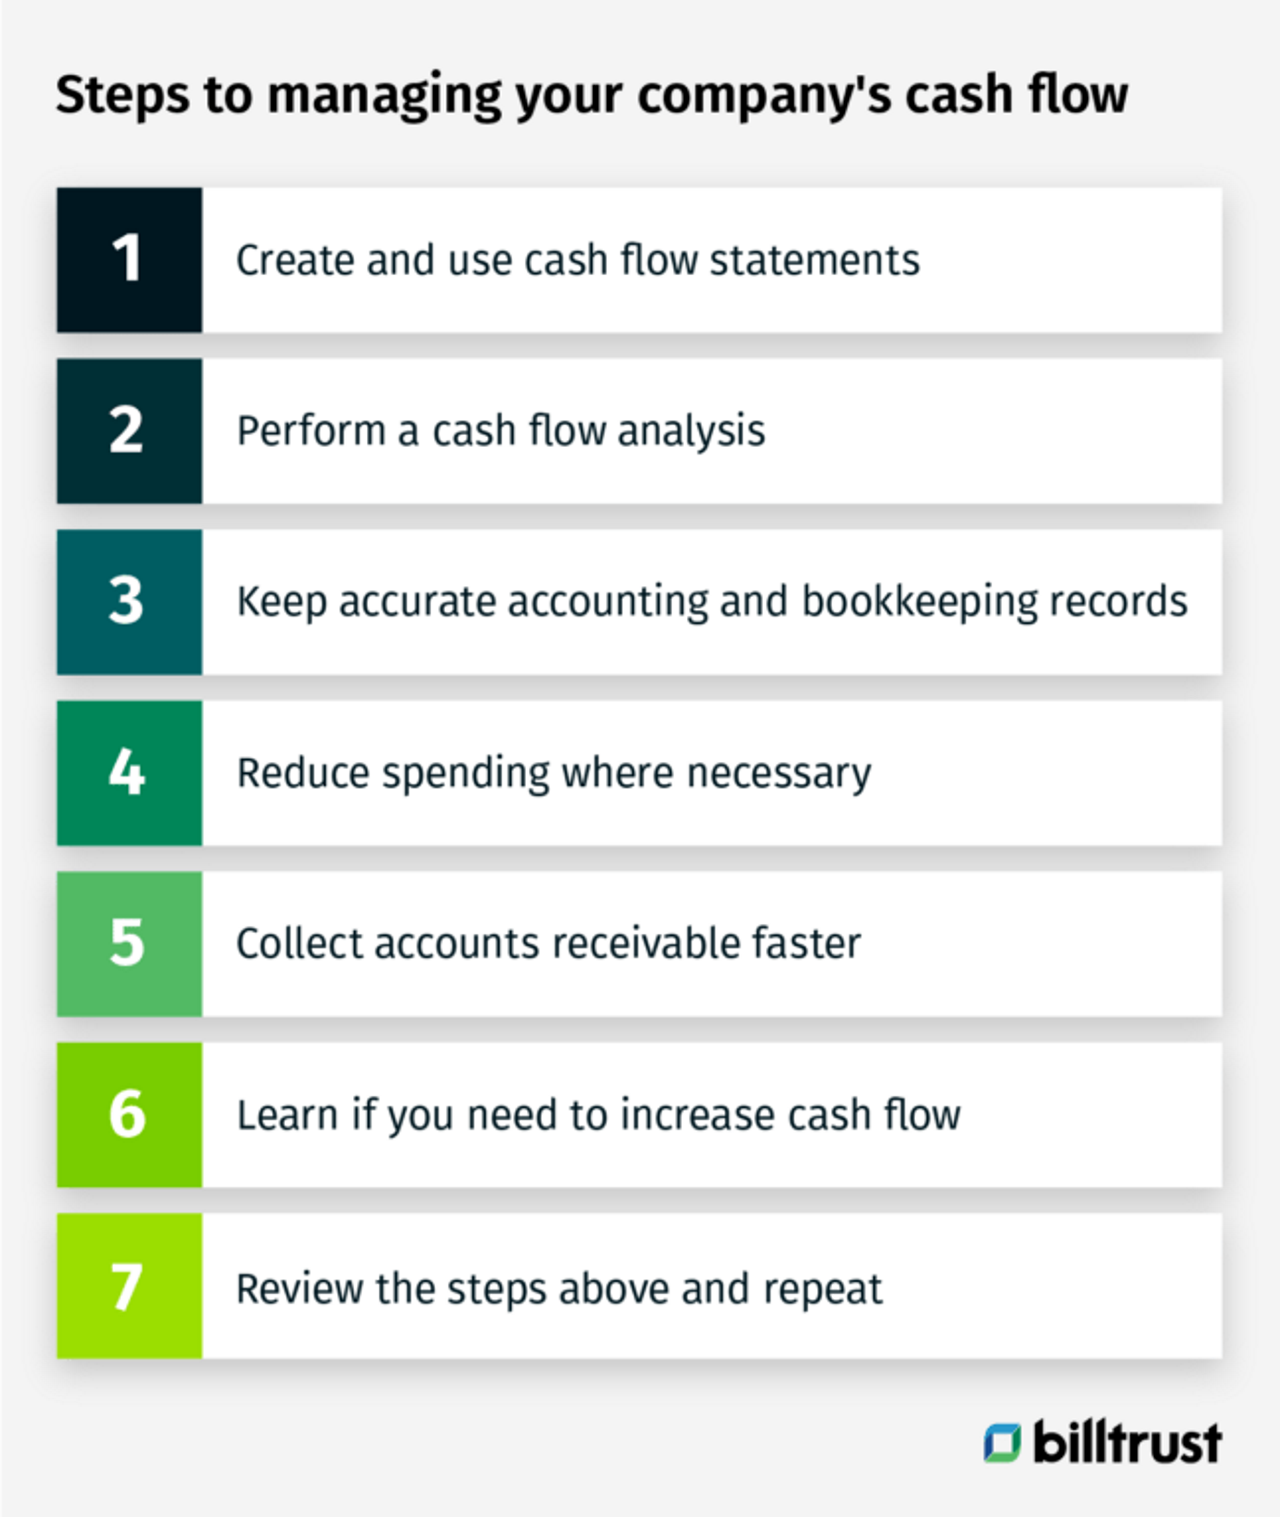 7 steps to managing your company's cash flow